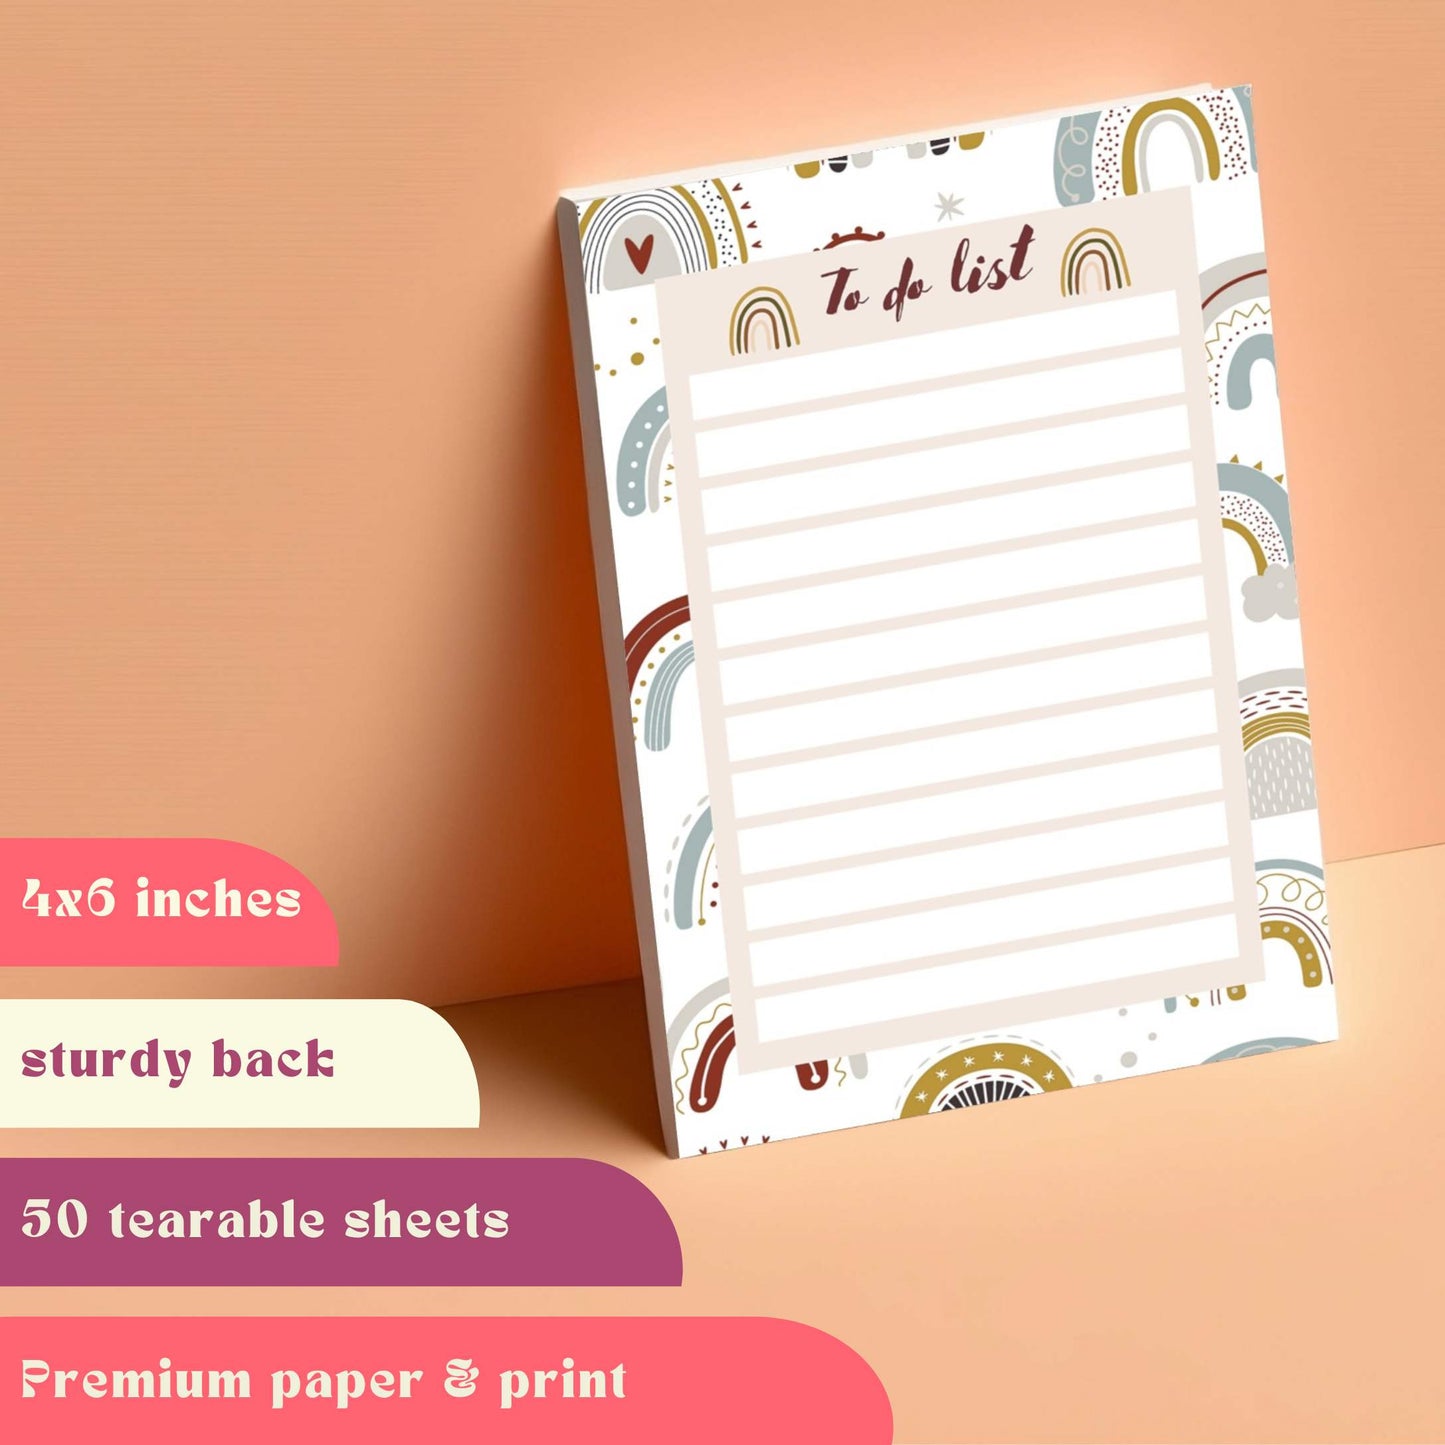 To-do List Notepad